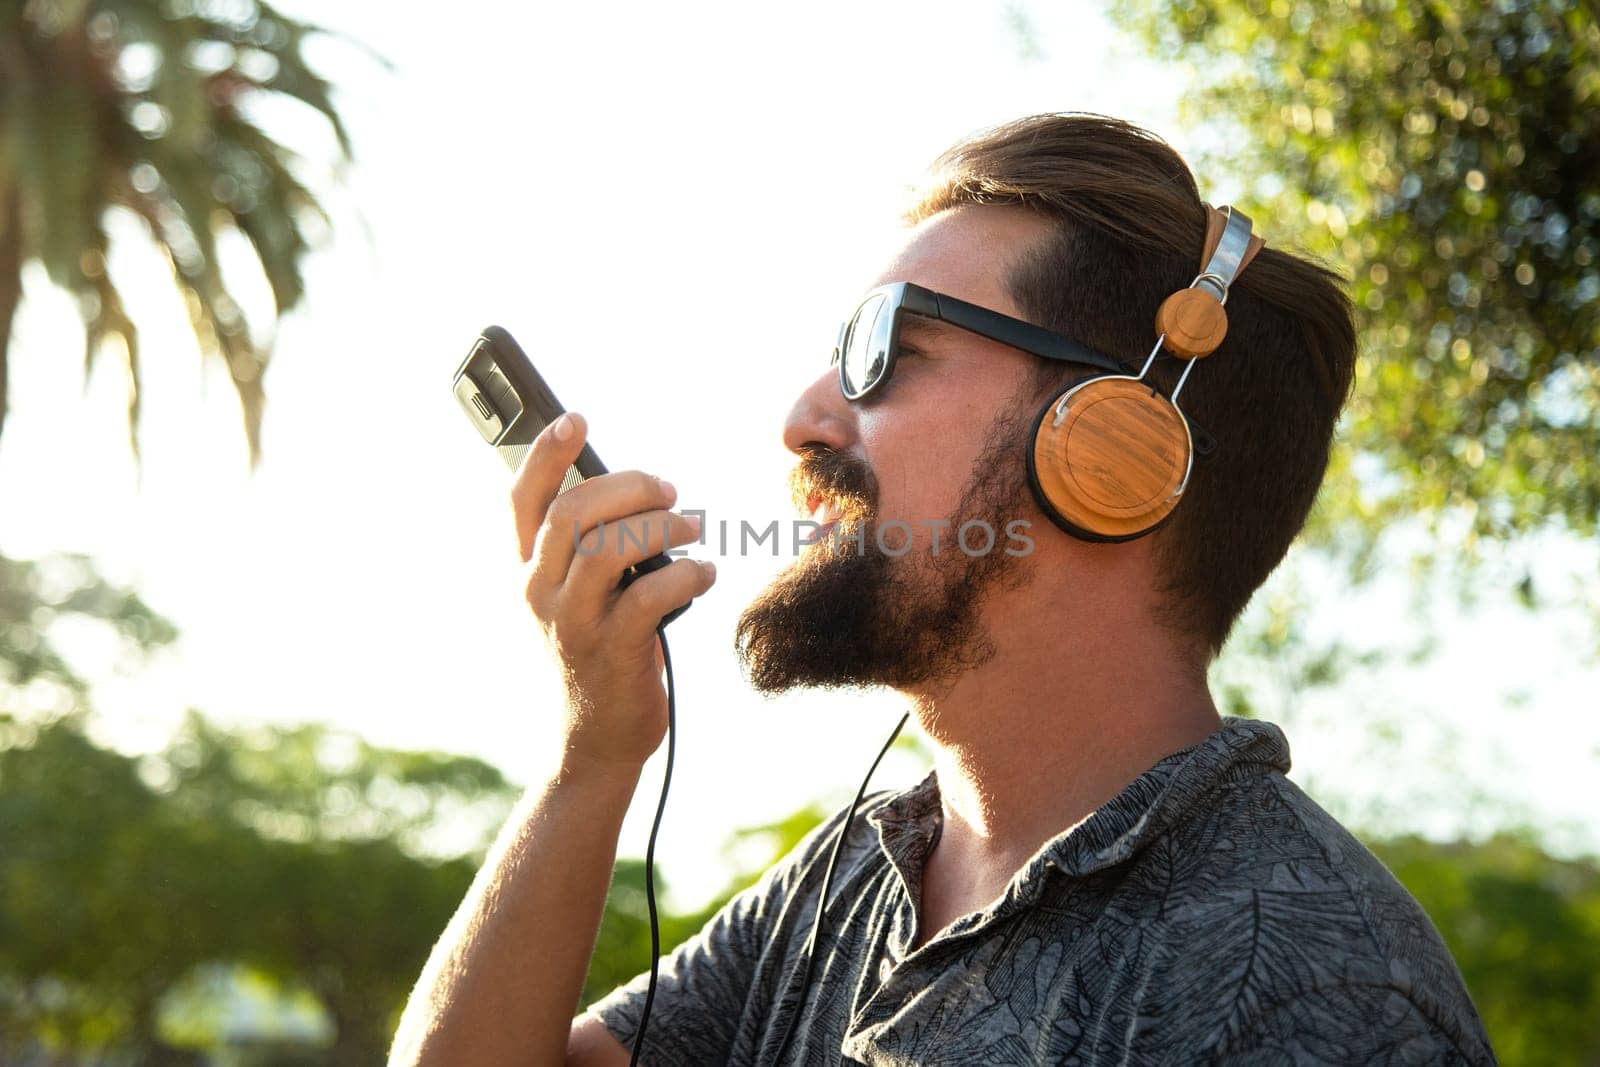 Side view of caucasian male recording voice message using mobile phone outdoors. Lifestyle concept.